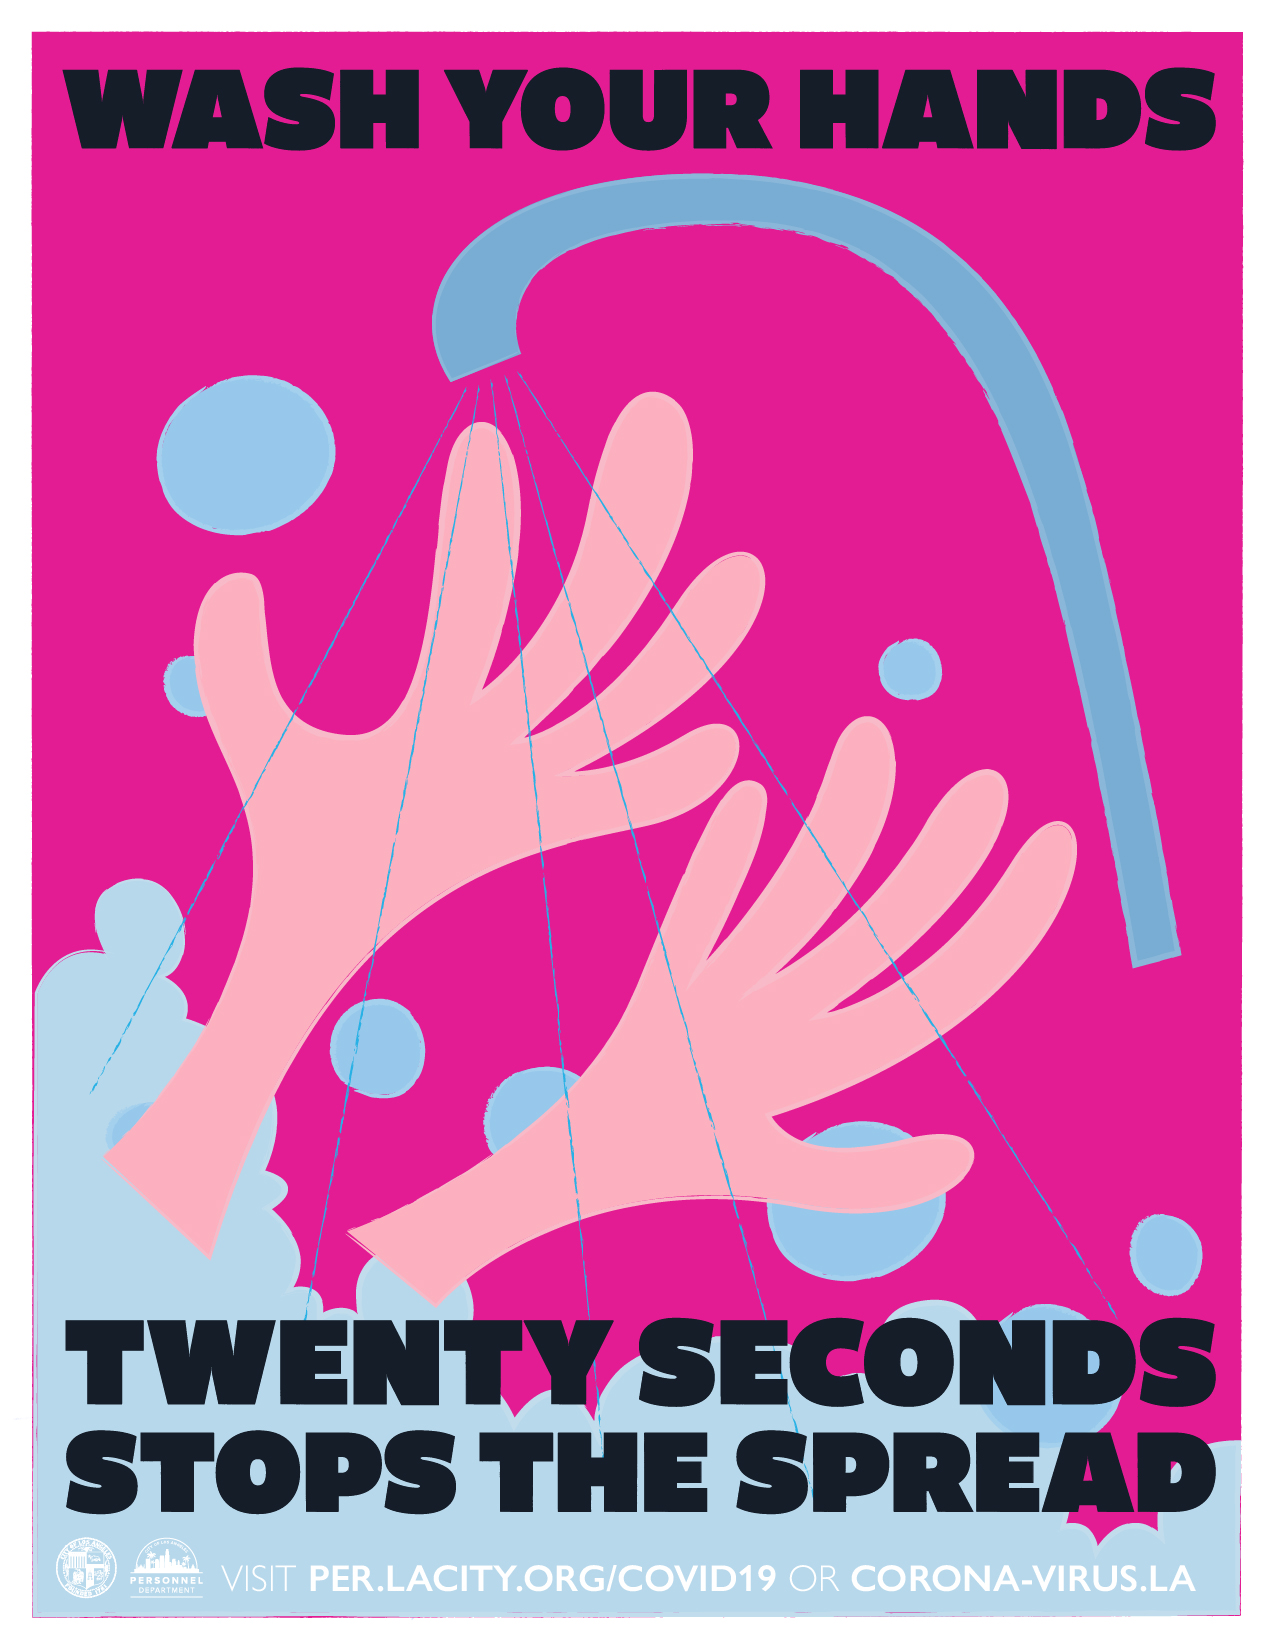 Stop The Spread: Wash Your Hands, 20 Seconds Stops the Spread Illustration